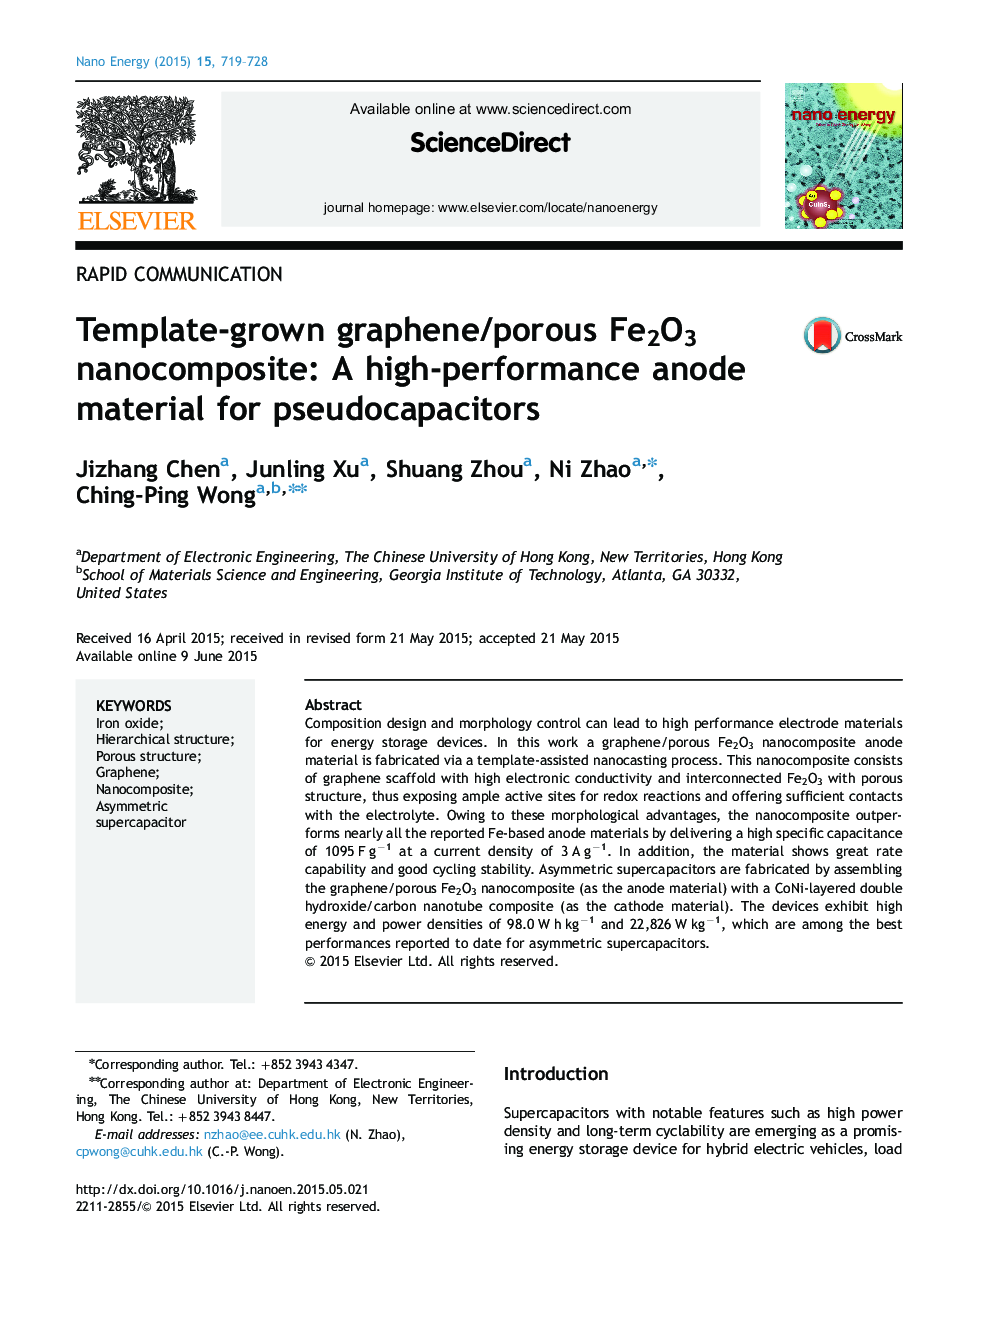 Template-grown graphene/porous Fe2O3 nanocomposite: A high-performance anode material for pseudocapacitors